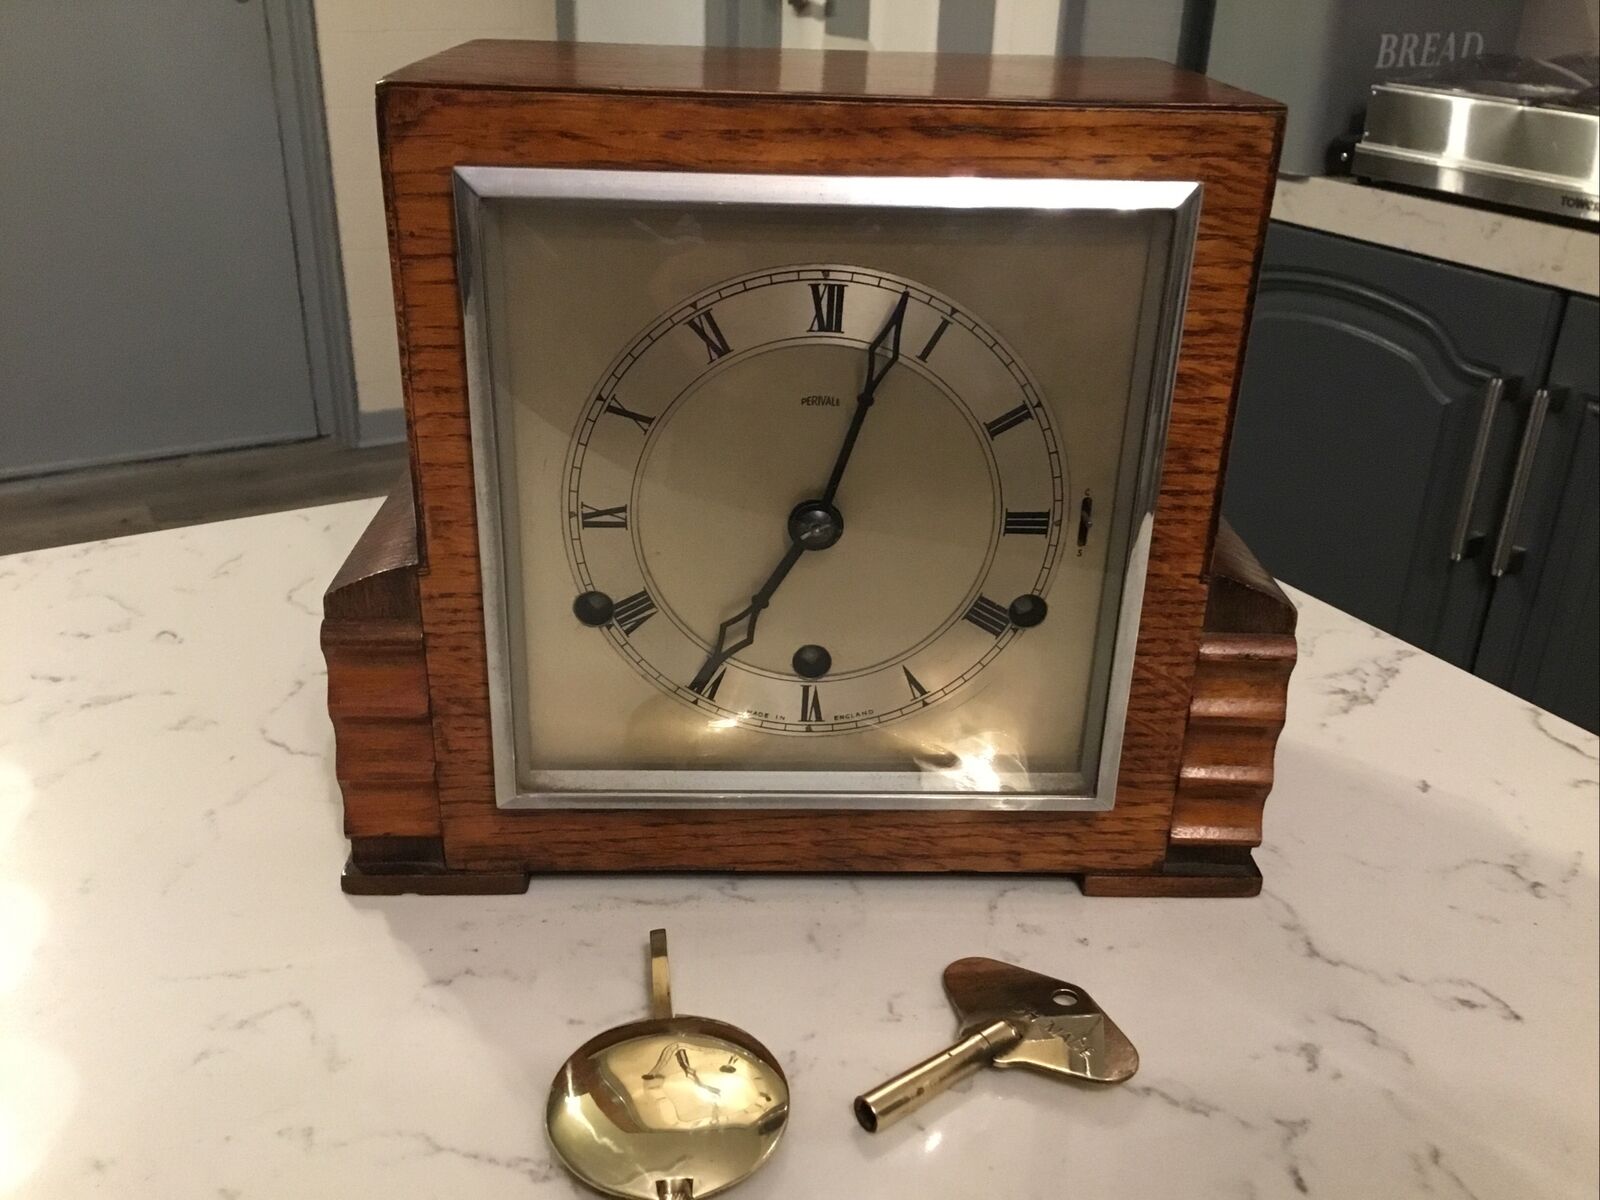 ANTIQUE 1930’s ART DECO MANTEL CLOCK, WESTMINSTER CHIMES. COMPLETE AND WORKING.